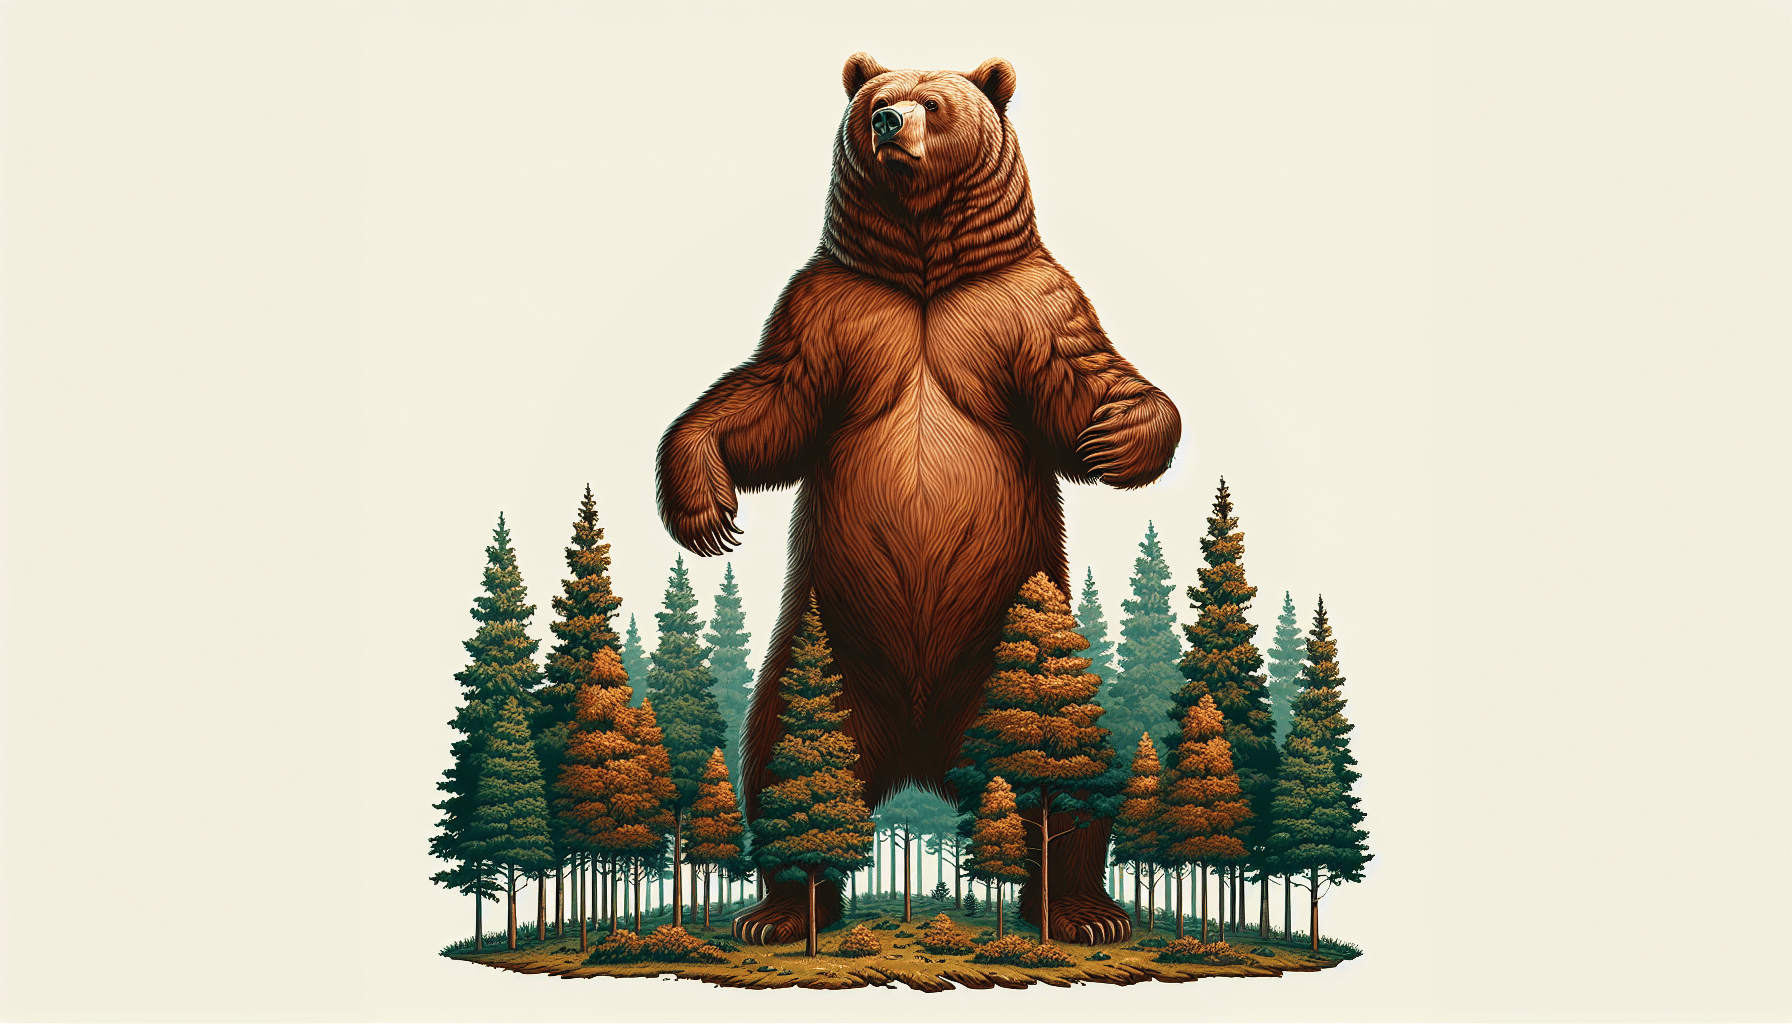 An artistic depiction of a towering brown bear, standing upright on its hind legs, its size clearly manifesting its grandeur and dominance in the wild. The bear has a rich, shiny coat of brown fur. There are coniferous trees in the background for scale, their tops reaching only up to the bear's shoulder, demonstrating the magnitude of the bear's height. The environment is a visually engaging wilderness landscape with no human presence, logos, or textual elements.